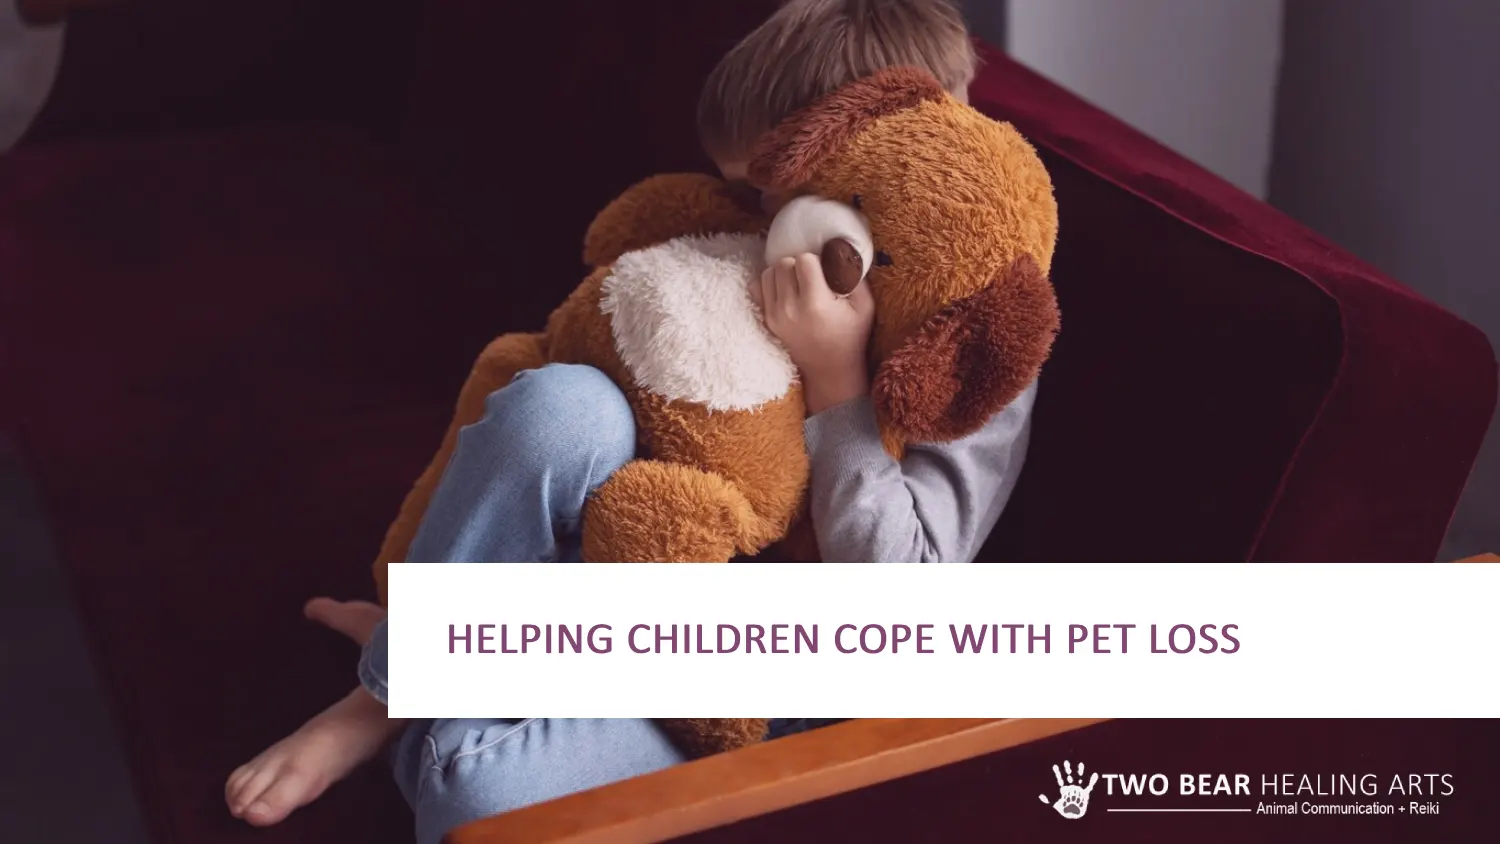 Tips and resources to help children understand and cope with the loss of a beloved pet.